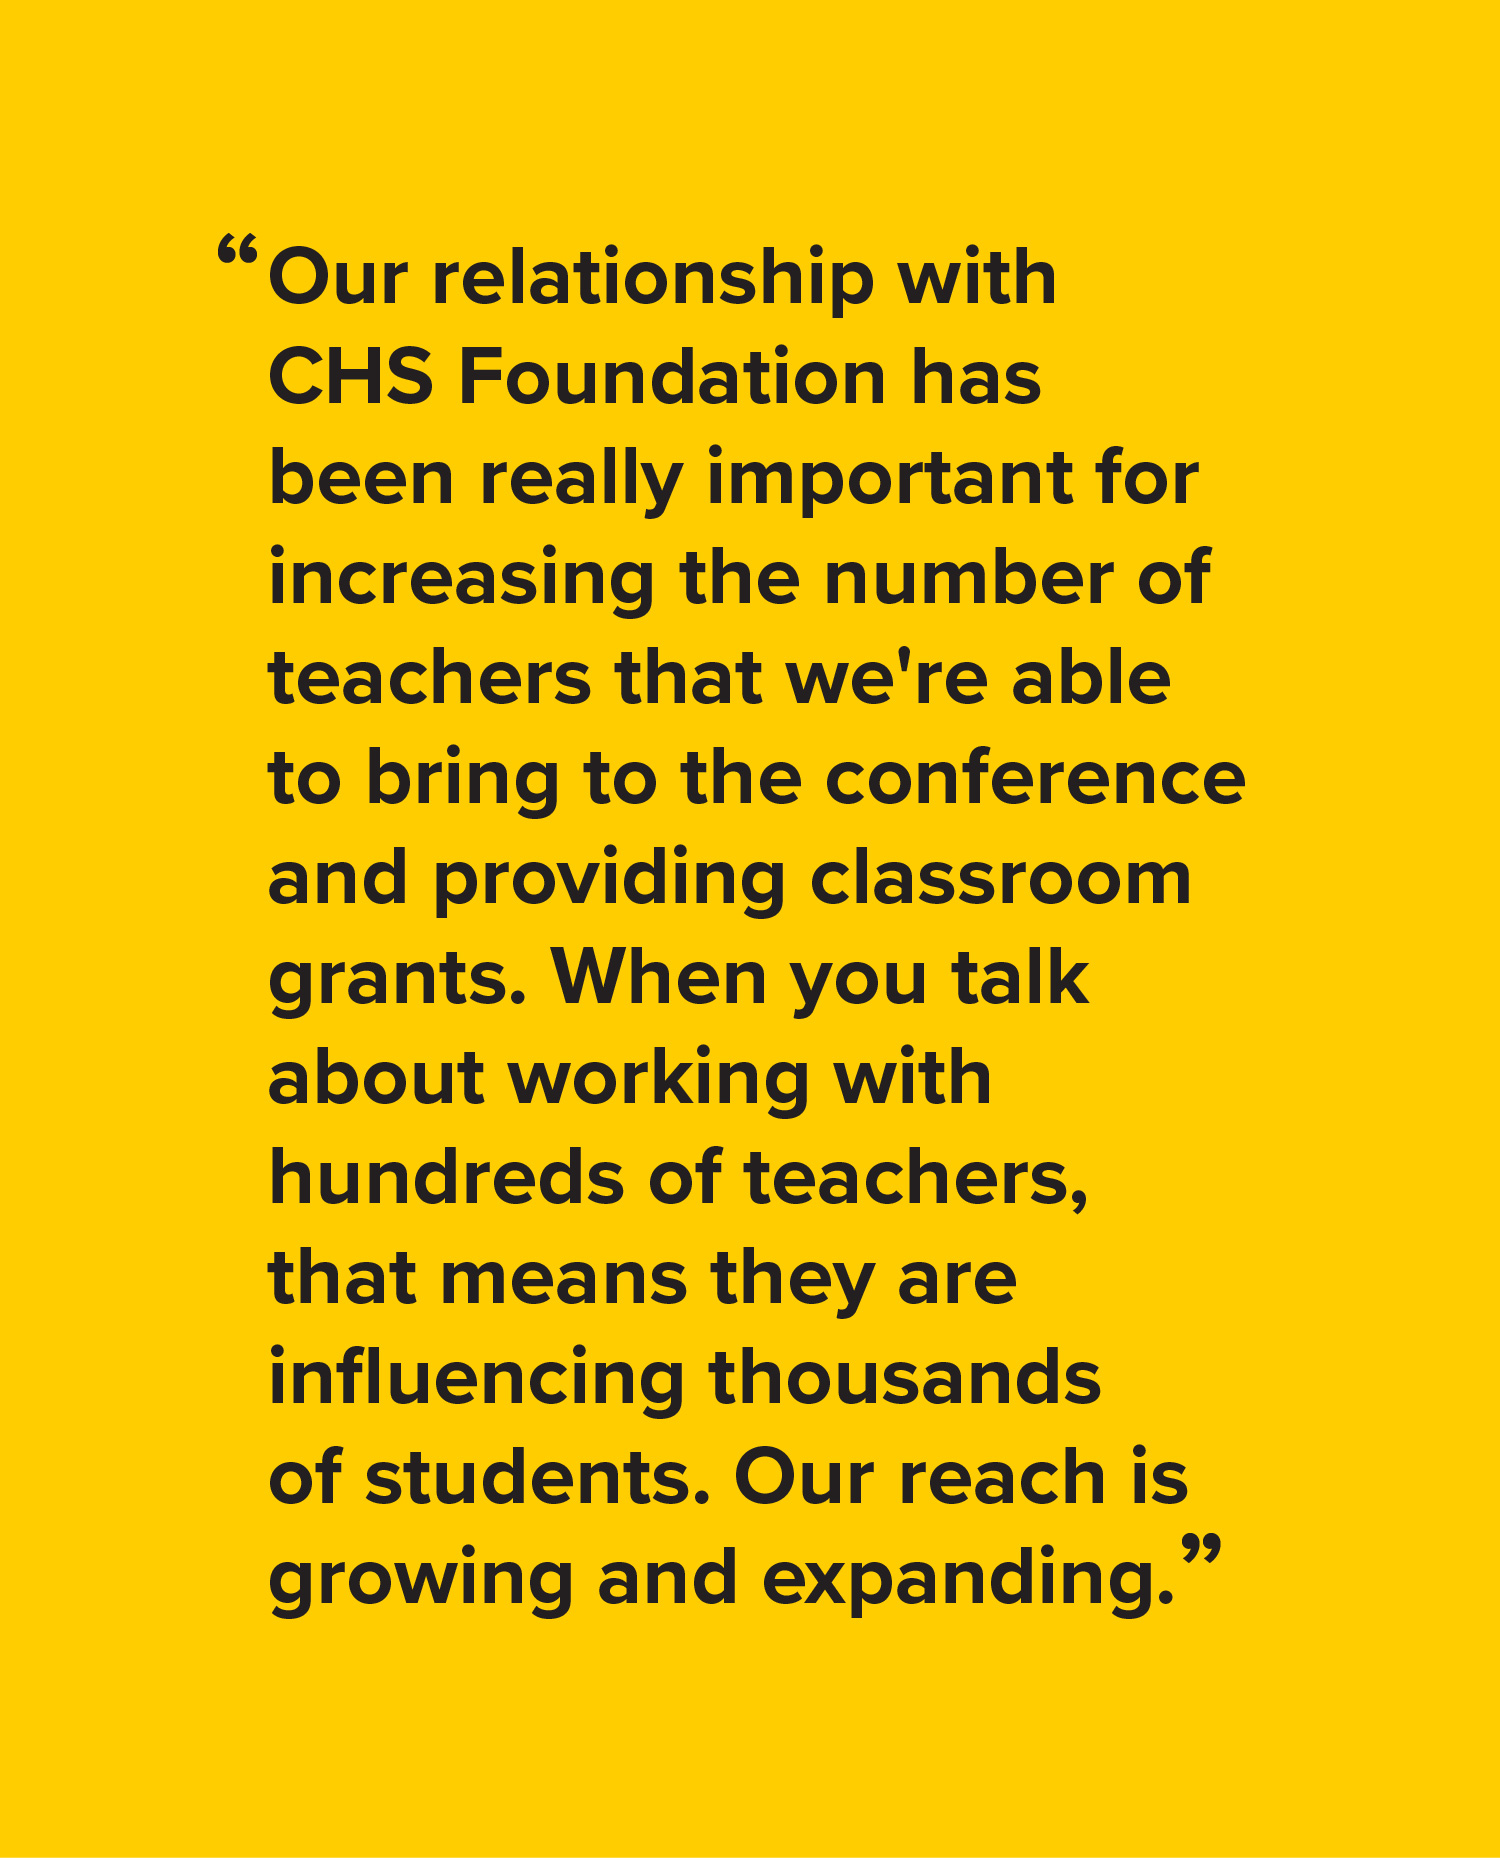 Our relationship with CHS Foundation has been really important for increasing the number of teachers that we're able to bring to the conference and providing classroom grants. When you talk about working with hundreds of teachers, that means they are influencing thousands of students. Our reach is growing and expanding